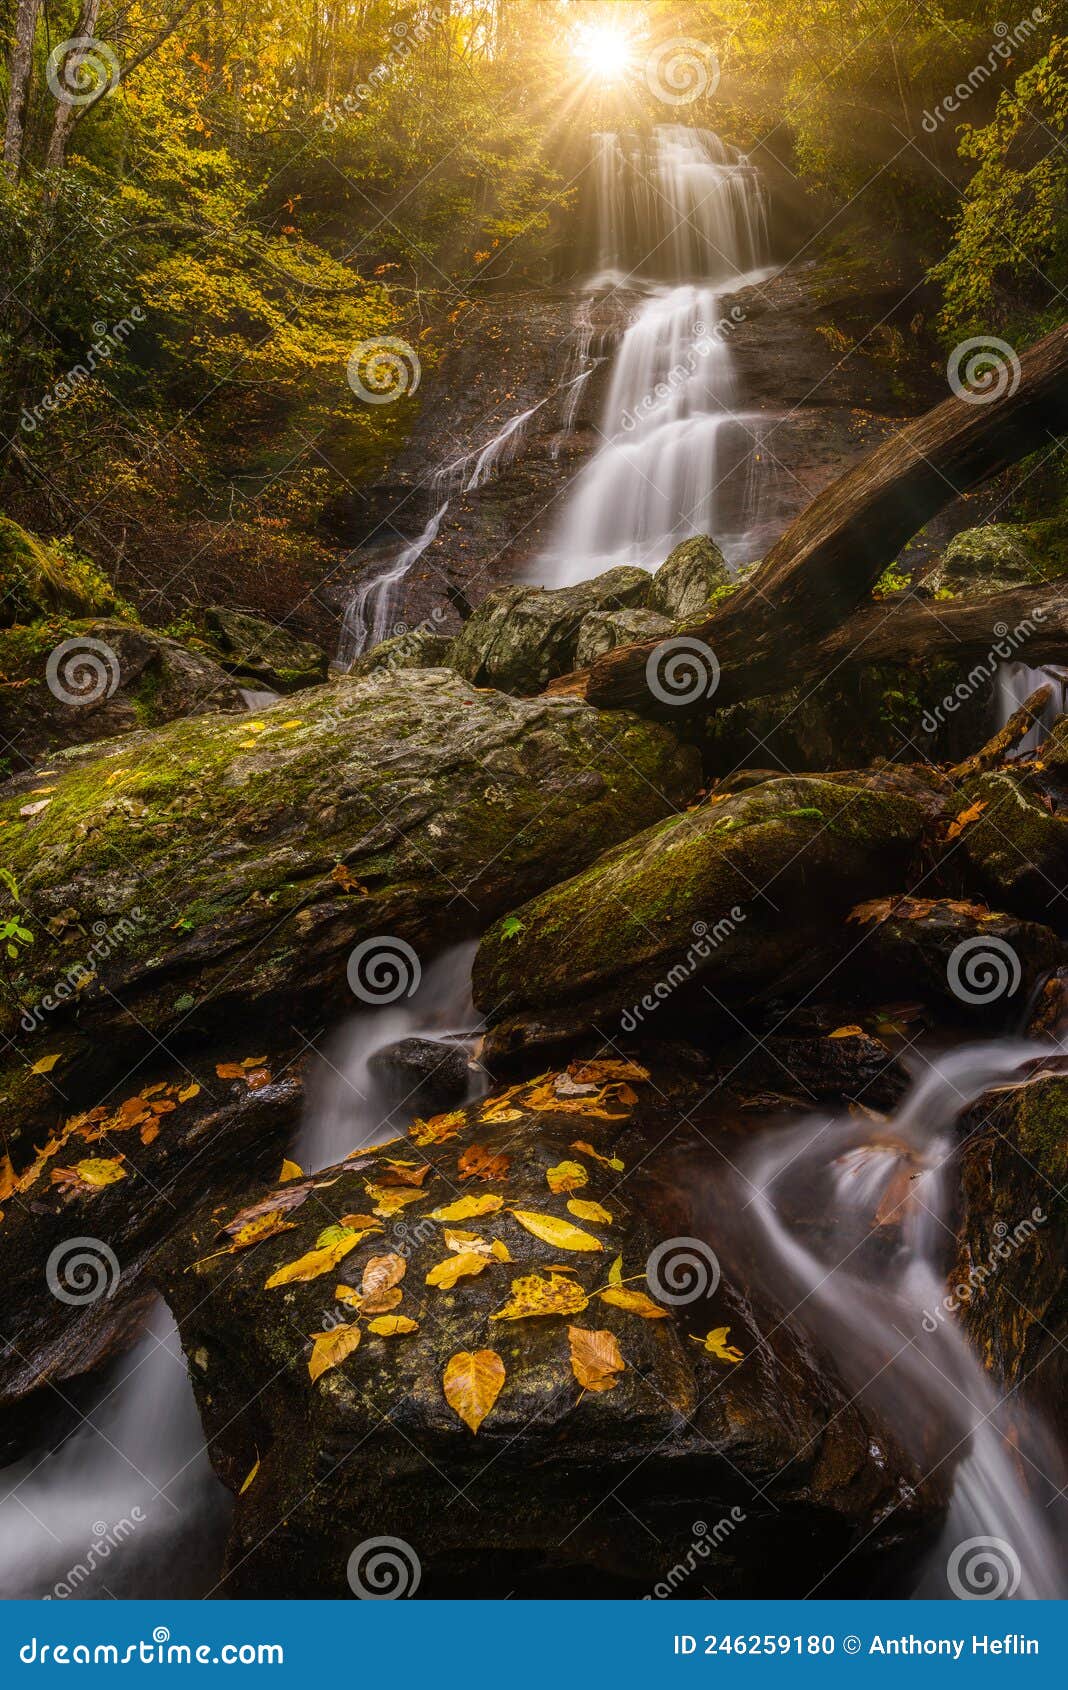 sceninc waterfall and autumn forest canopy